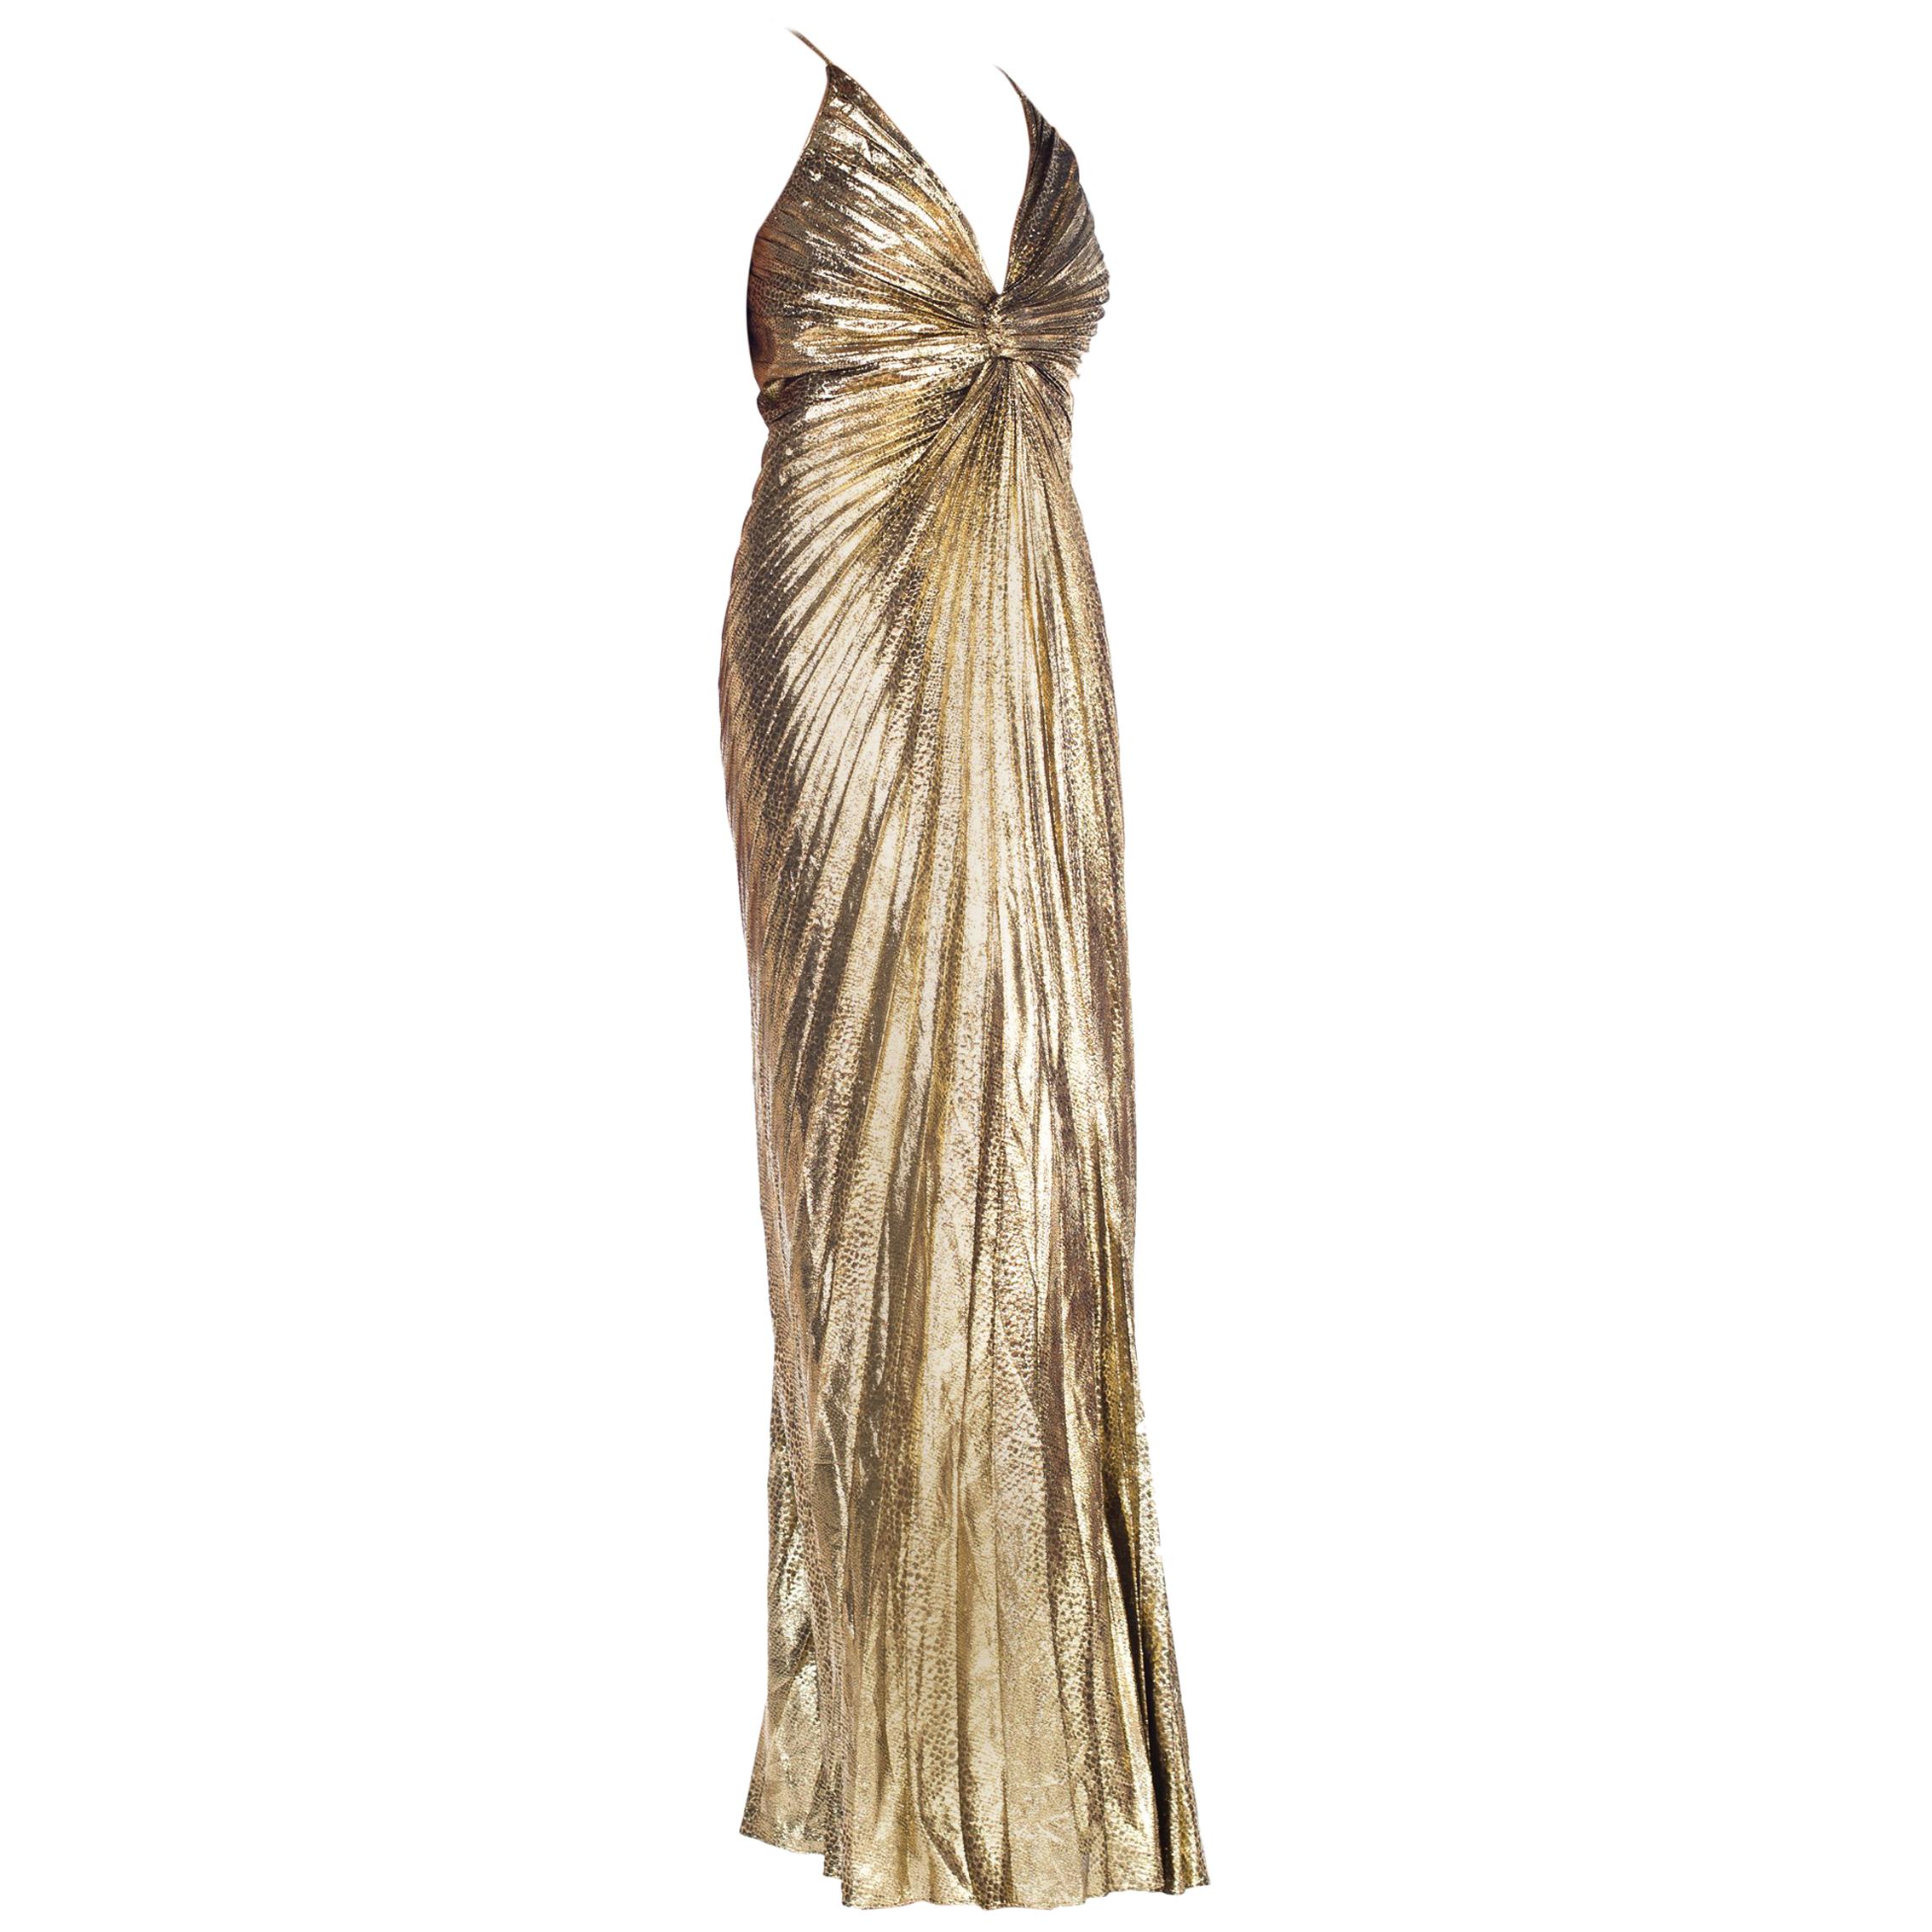 Iconic Travilla Gold Lamé Marilyn Monroe Disco Halter Gown